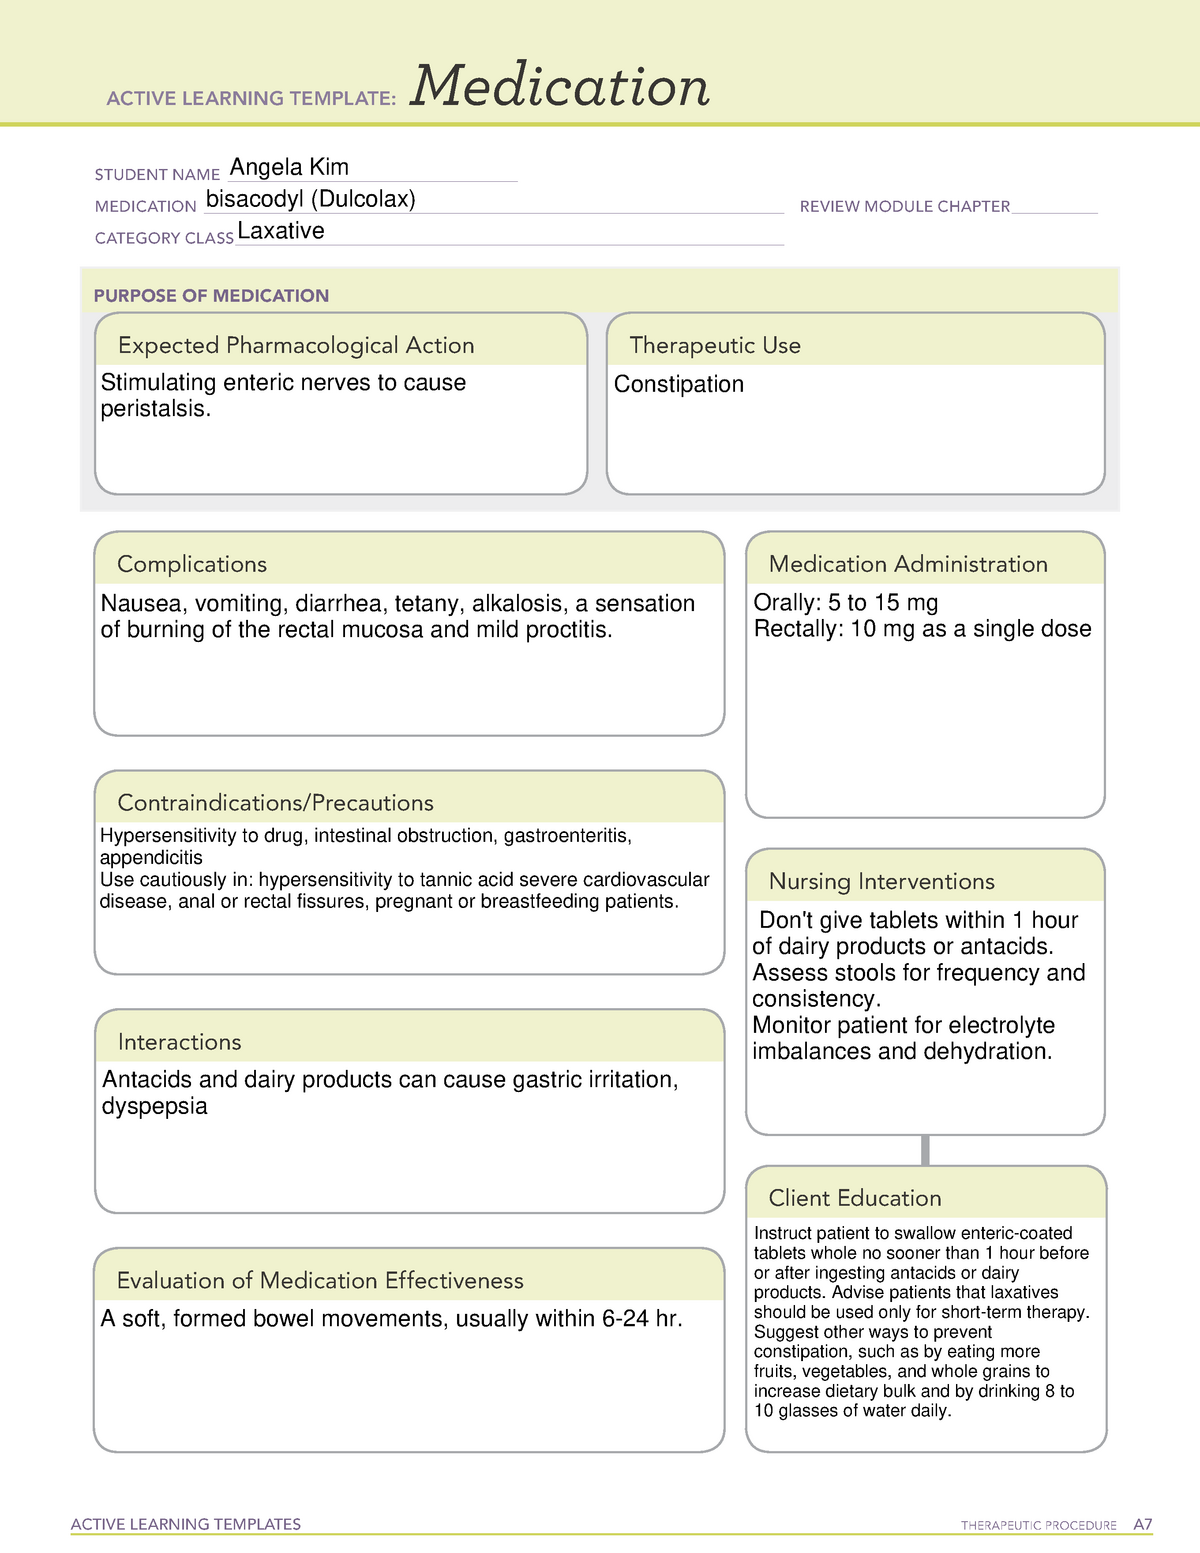 bisacodyl-dulcolax-ati-active-learning-templates-therapeutic